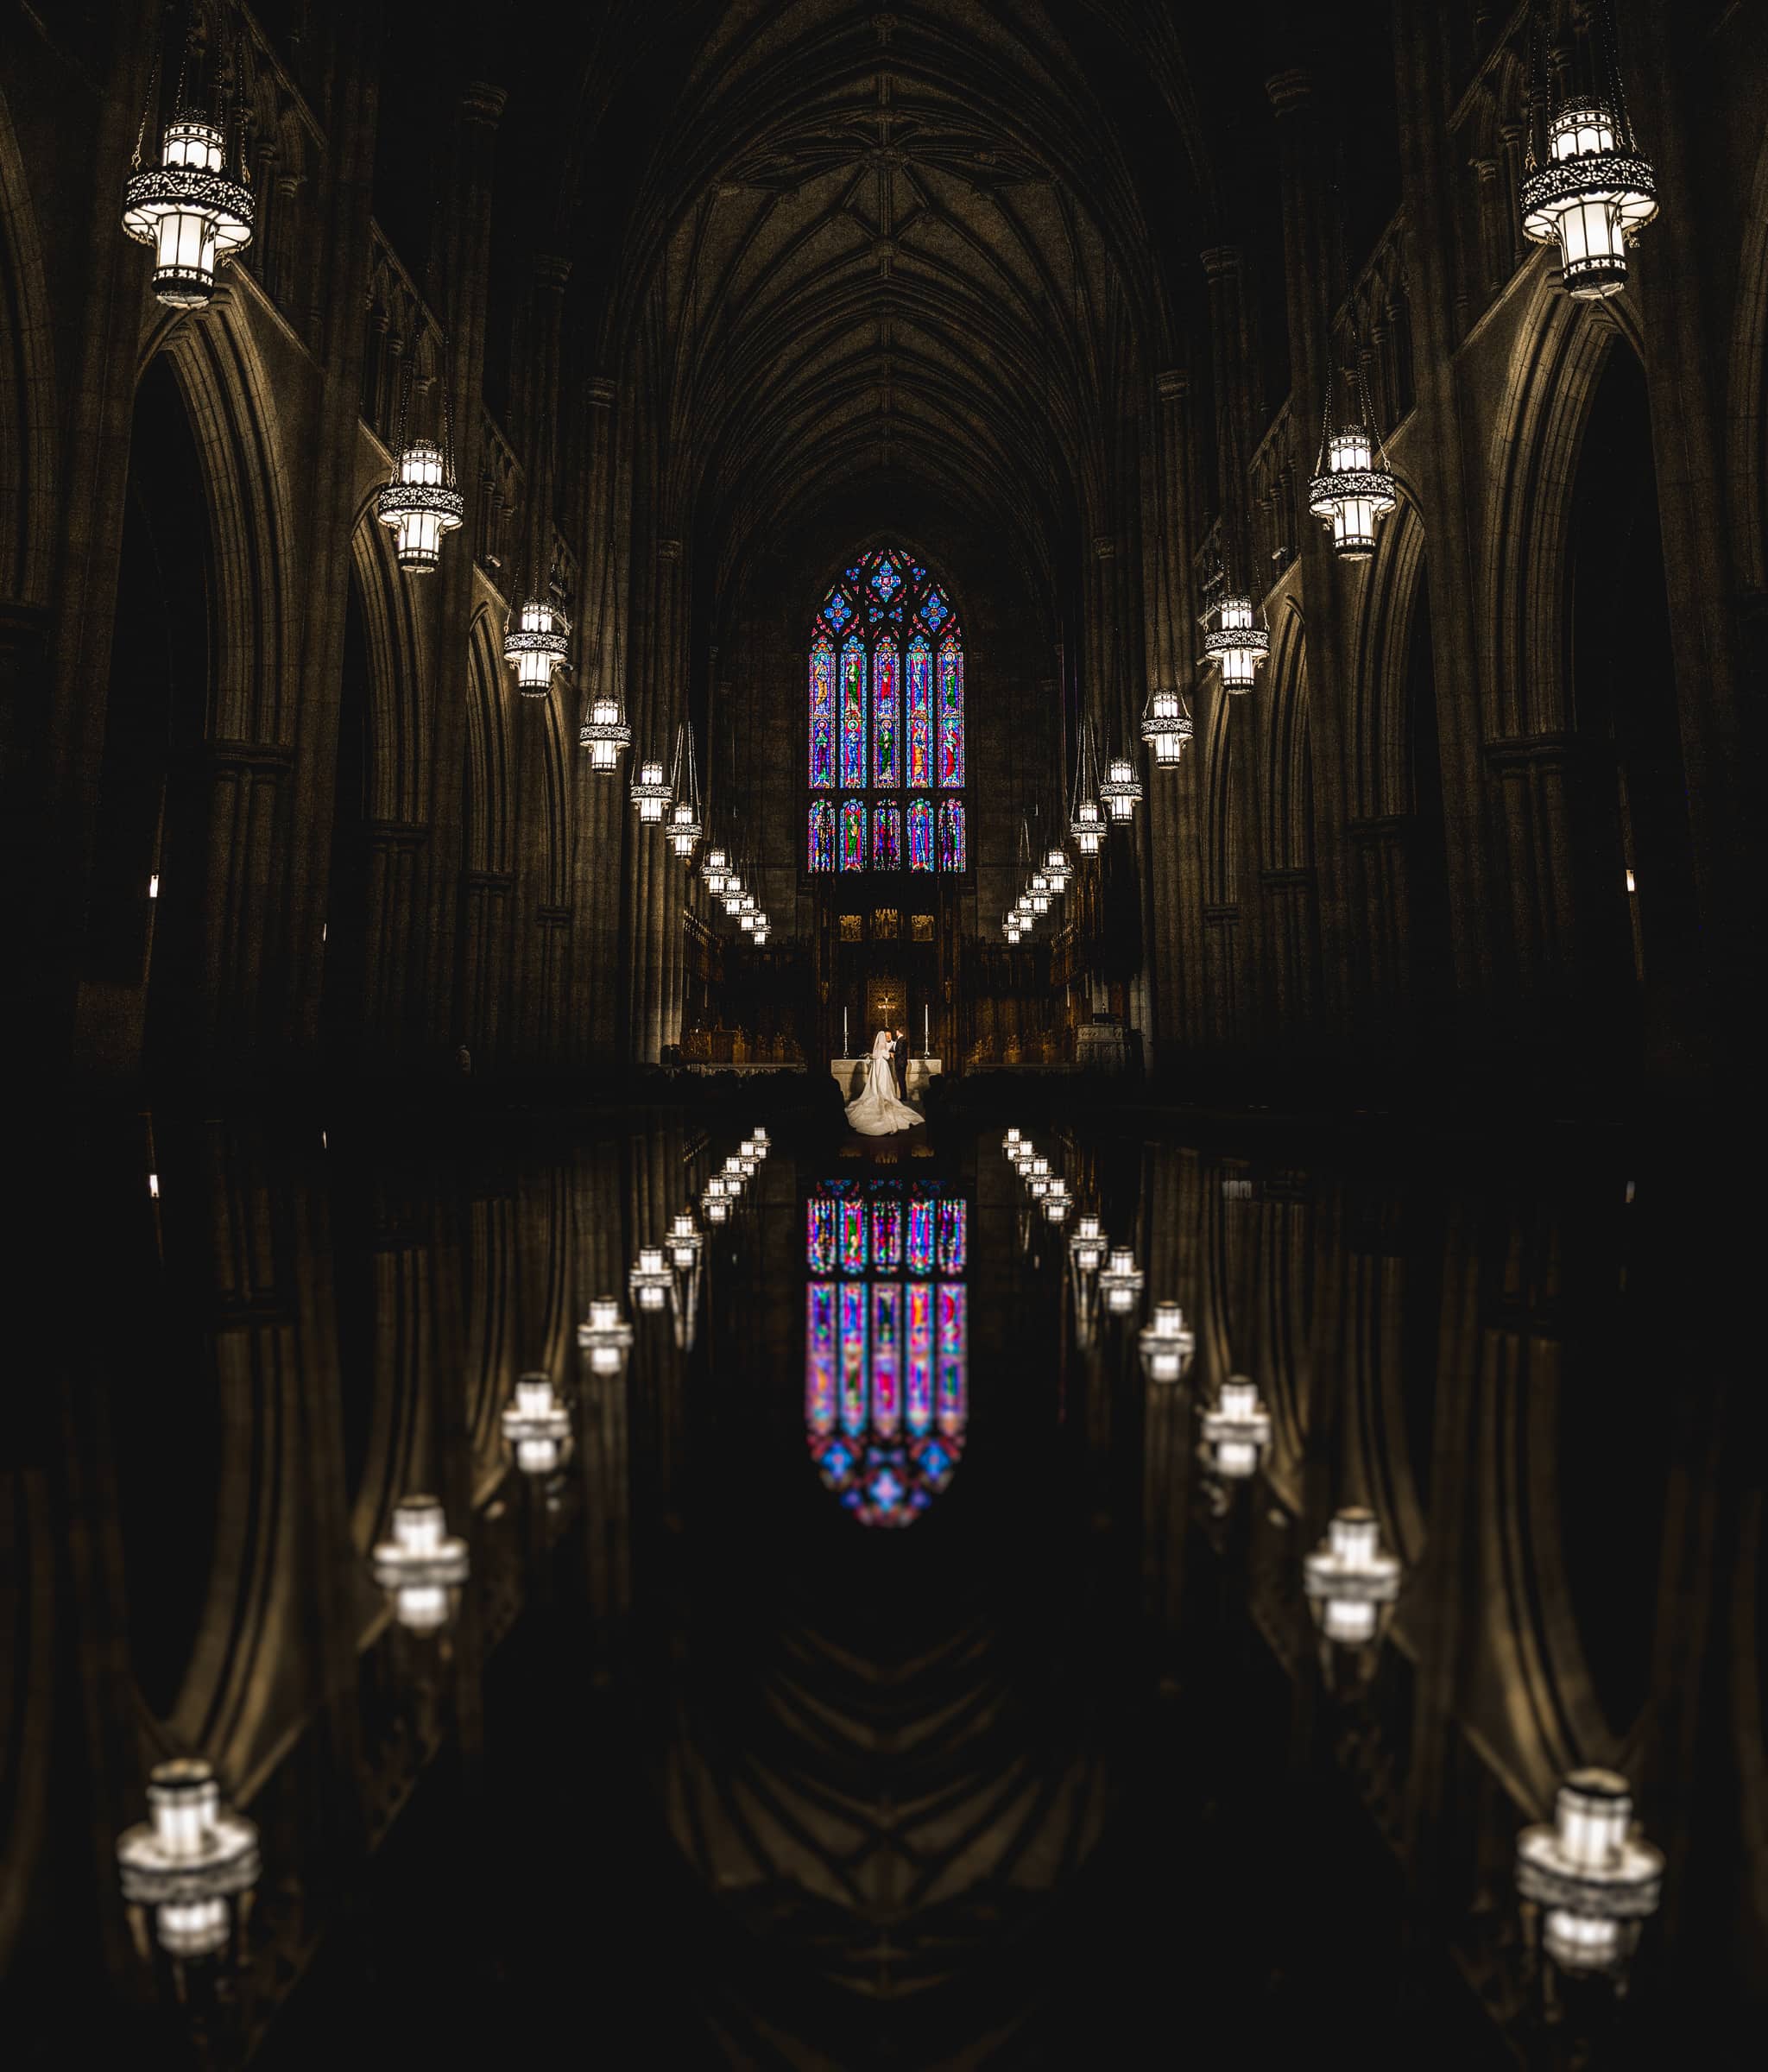 Duke Chapel Weddings - Ceative Reflection Image Ceremony in Color by Joe Payne